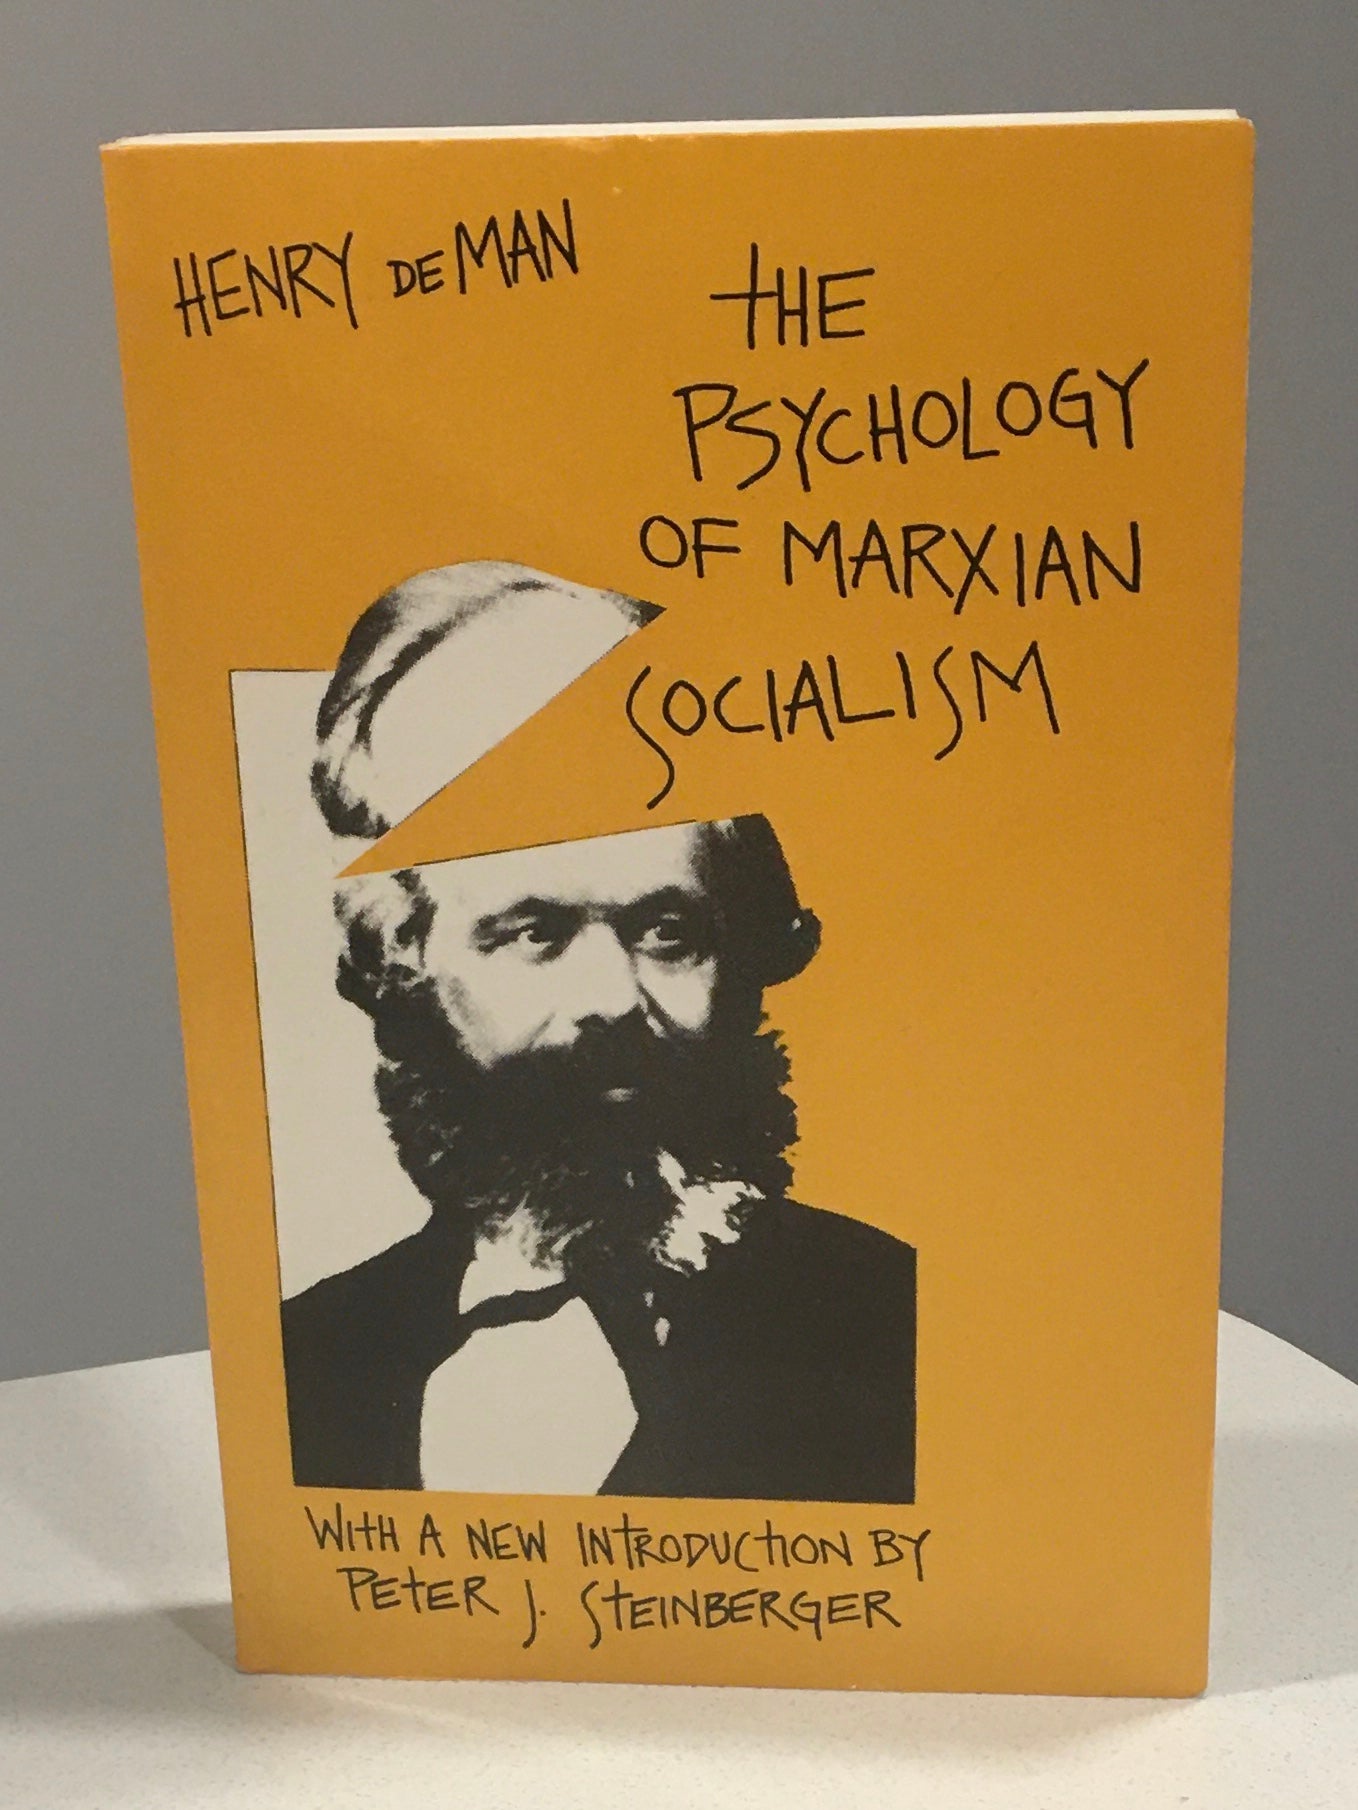 The Psychology of Marxian Socialism